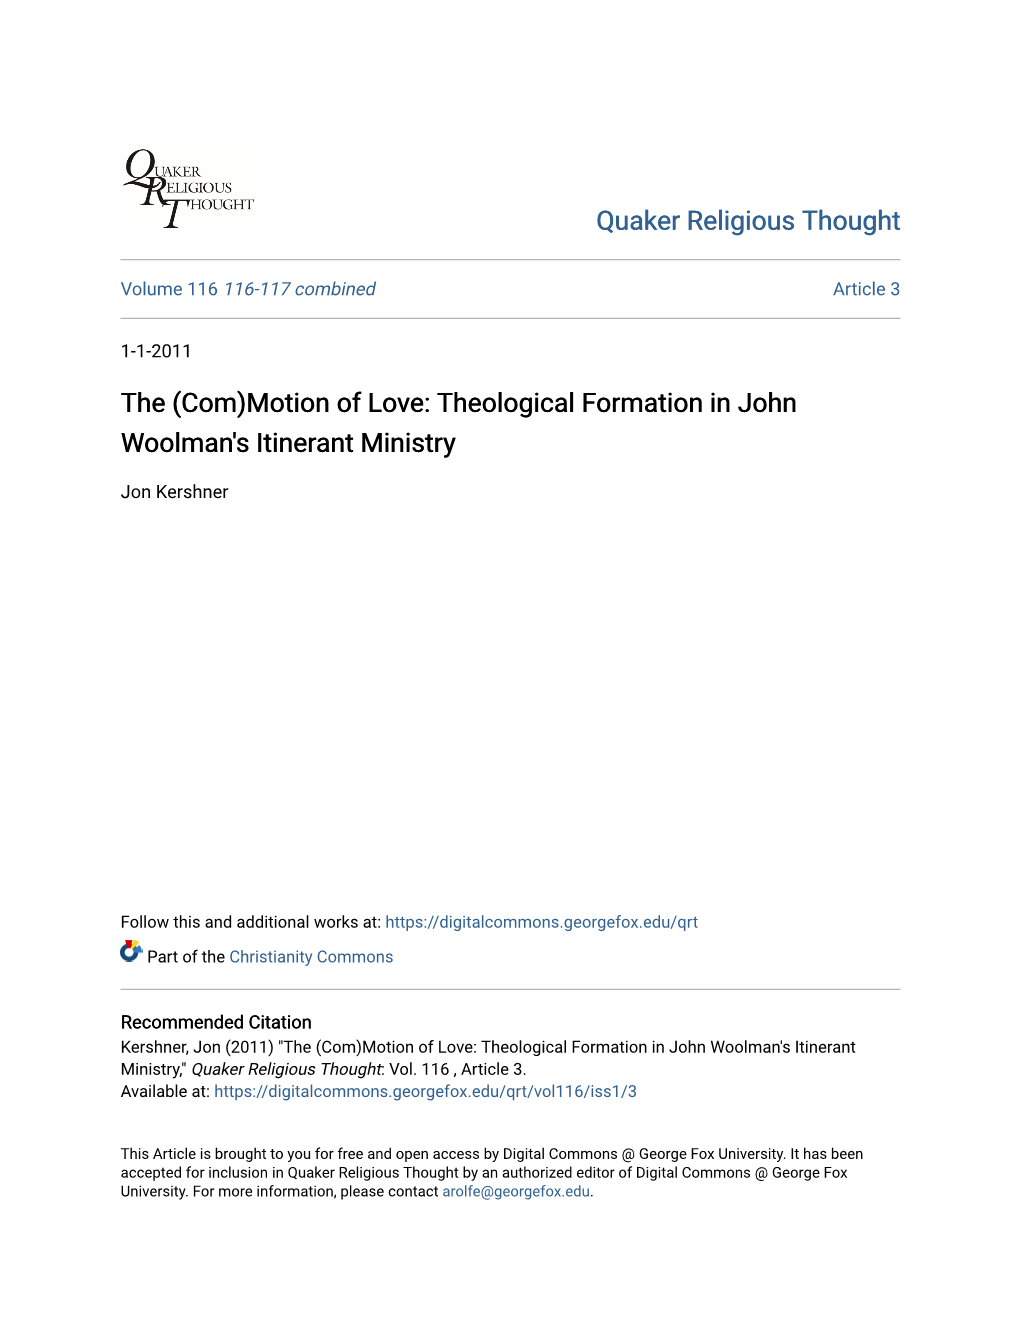 Theological Formation in John Woolman's Itinerant Ministry